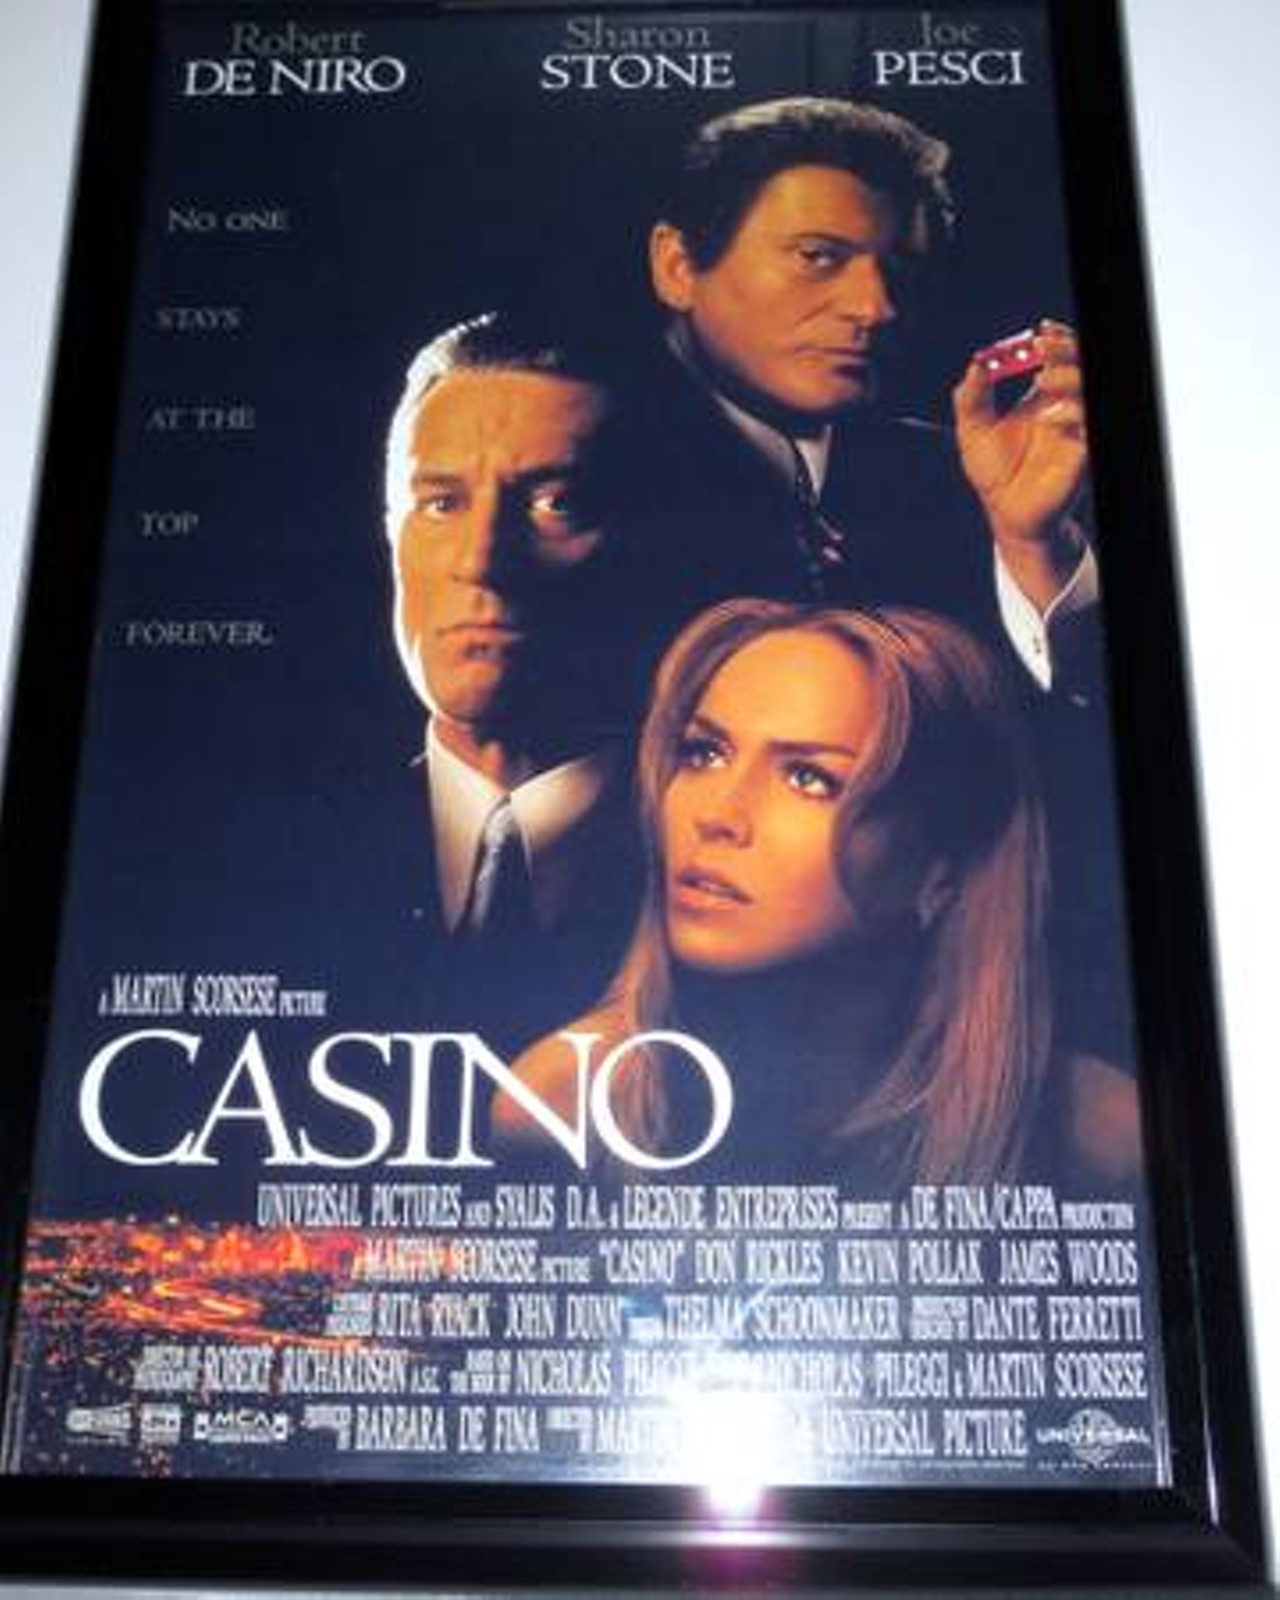 Casino Movie Poster
$40 for a framed poster of a forgotten Robert De Niro movie? Sure, why not! Sharon Stone is killing it, though!